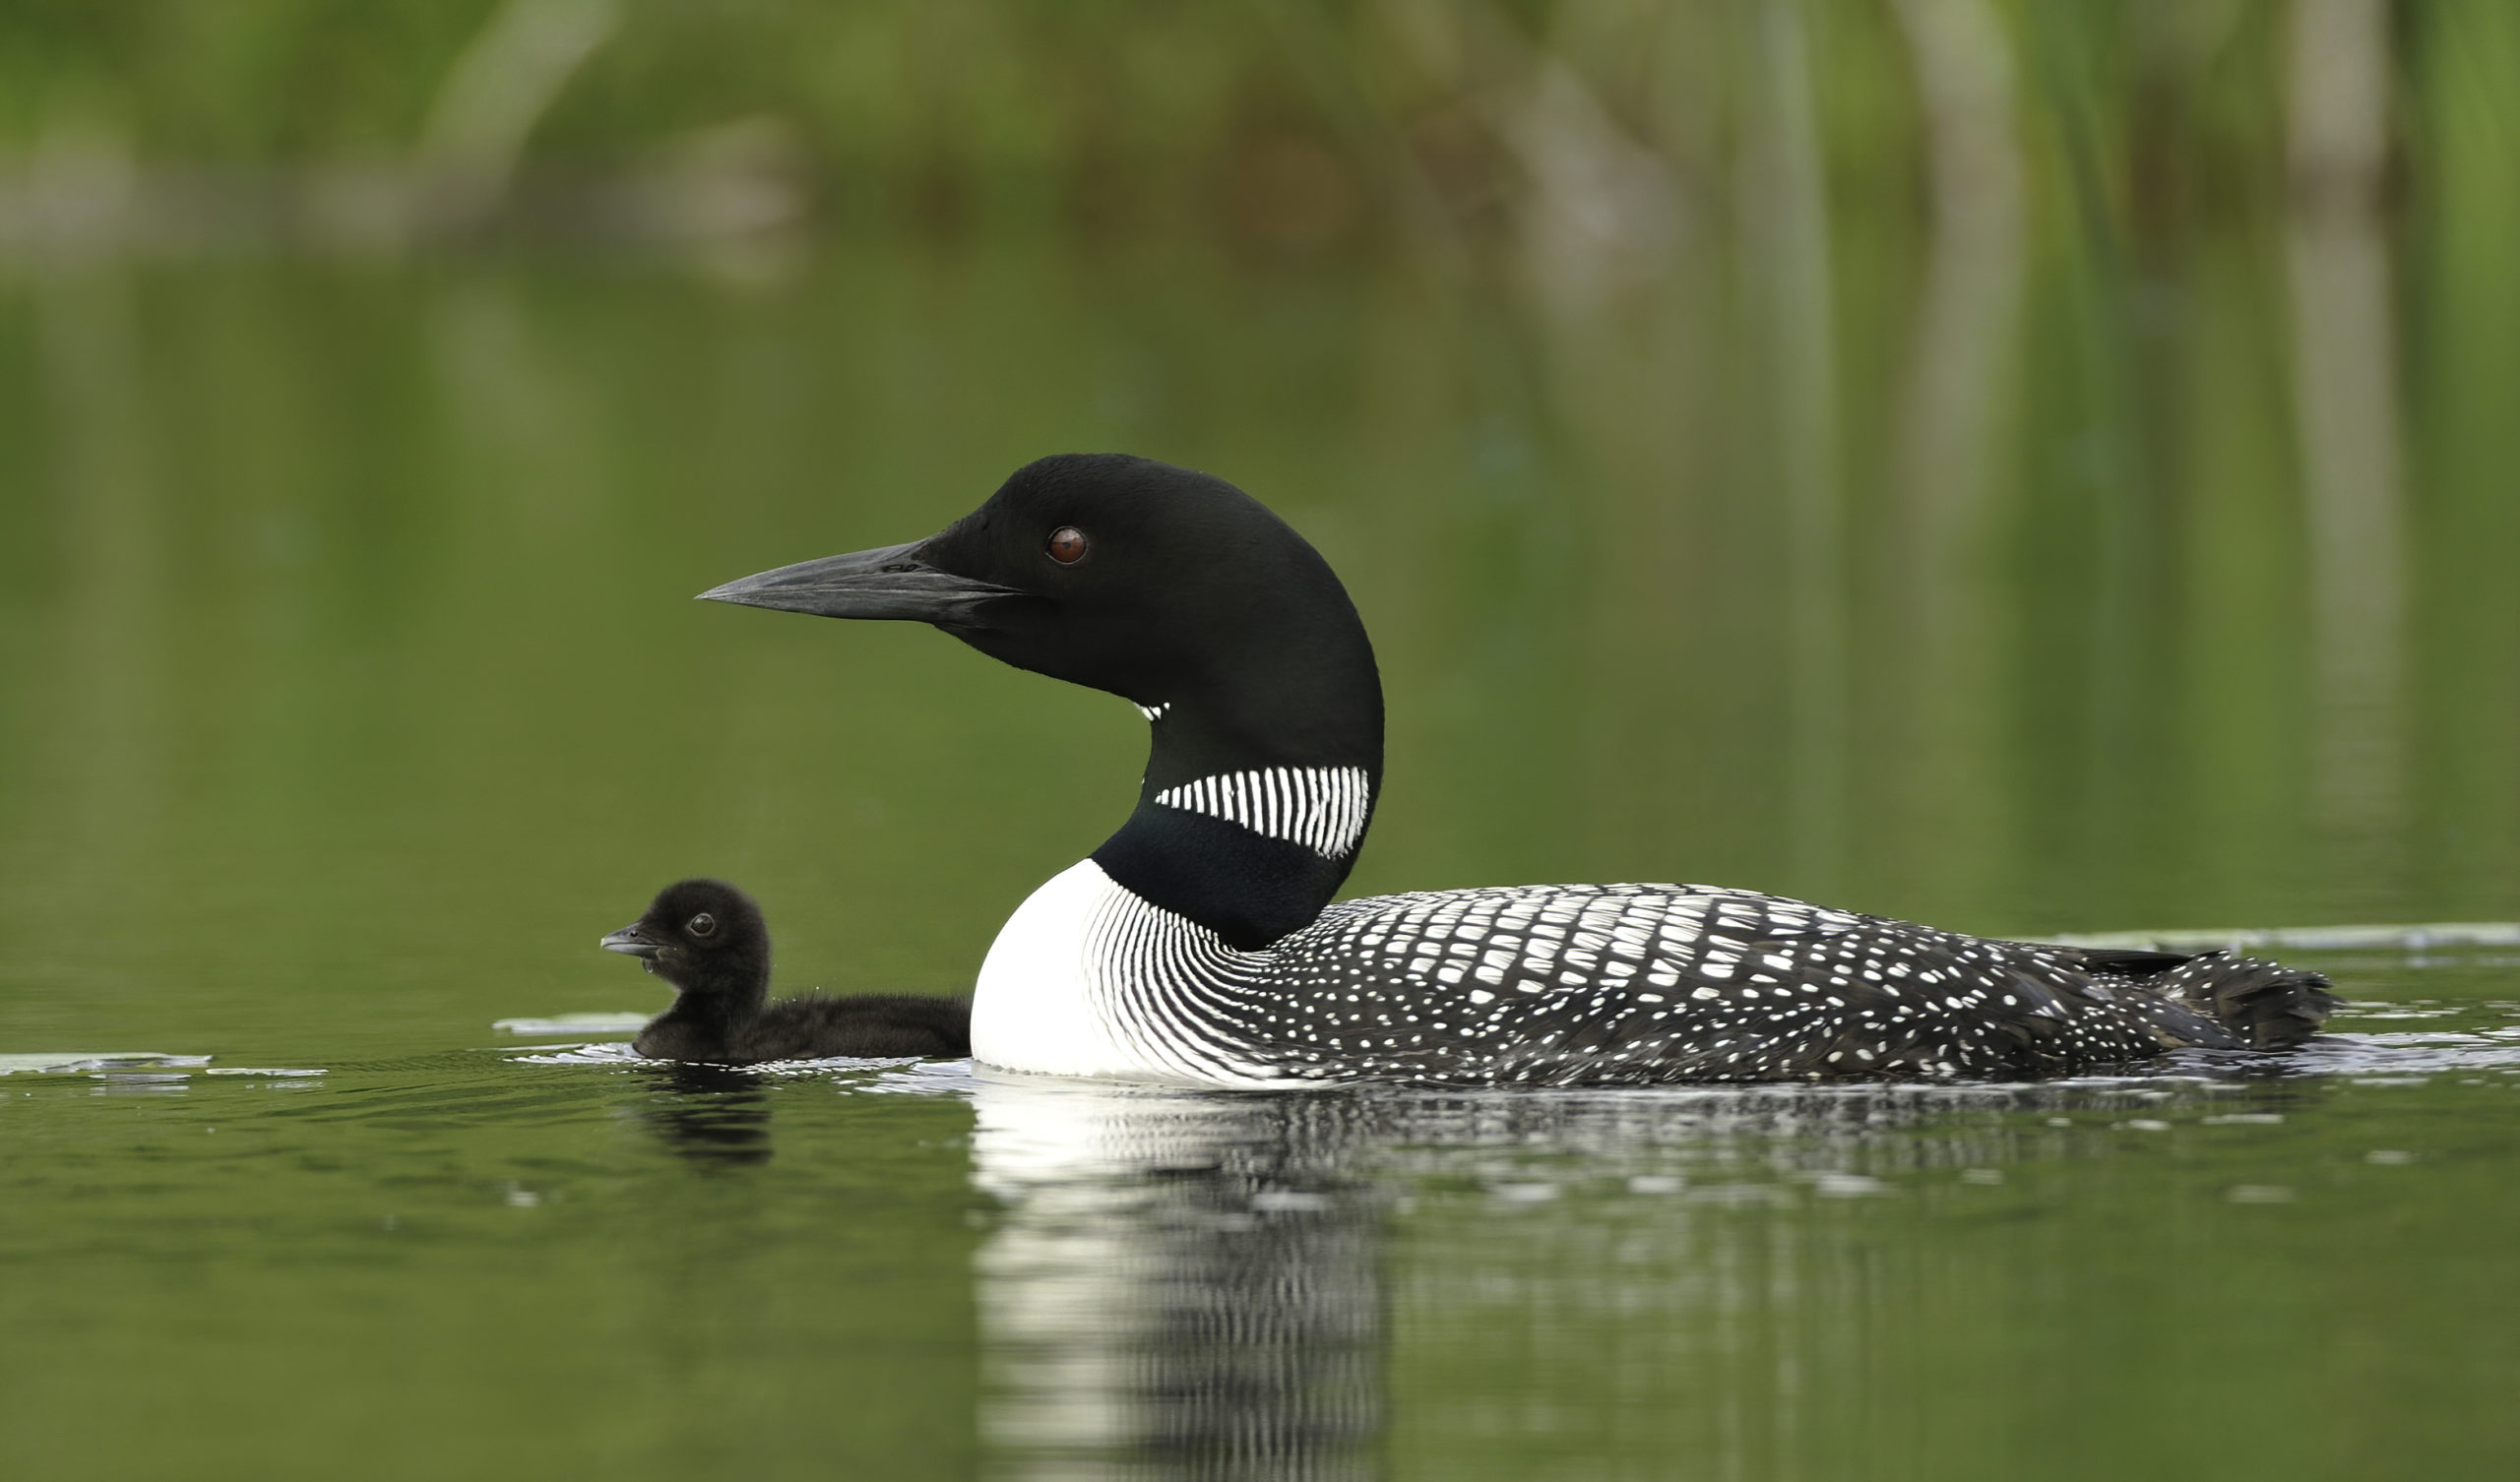 Canada is rich in wildlife and Mark's love for nature photography is one of the ways that he recharges. This image was captured only one day after the loon chick hatched.  